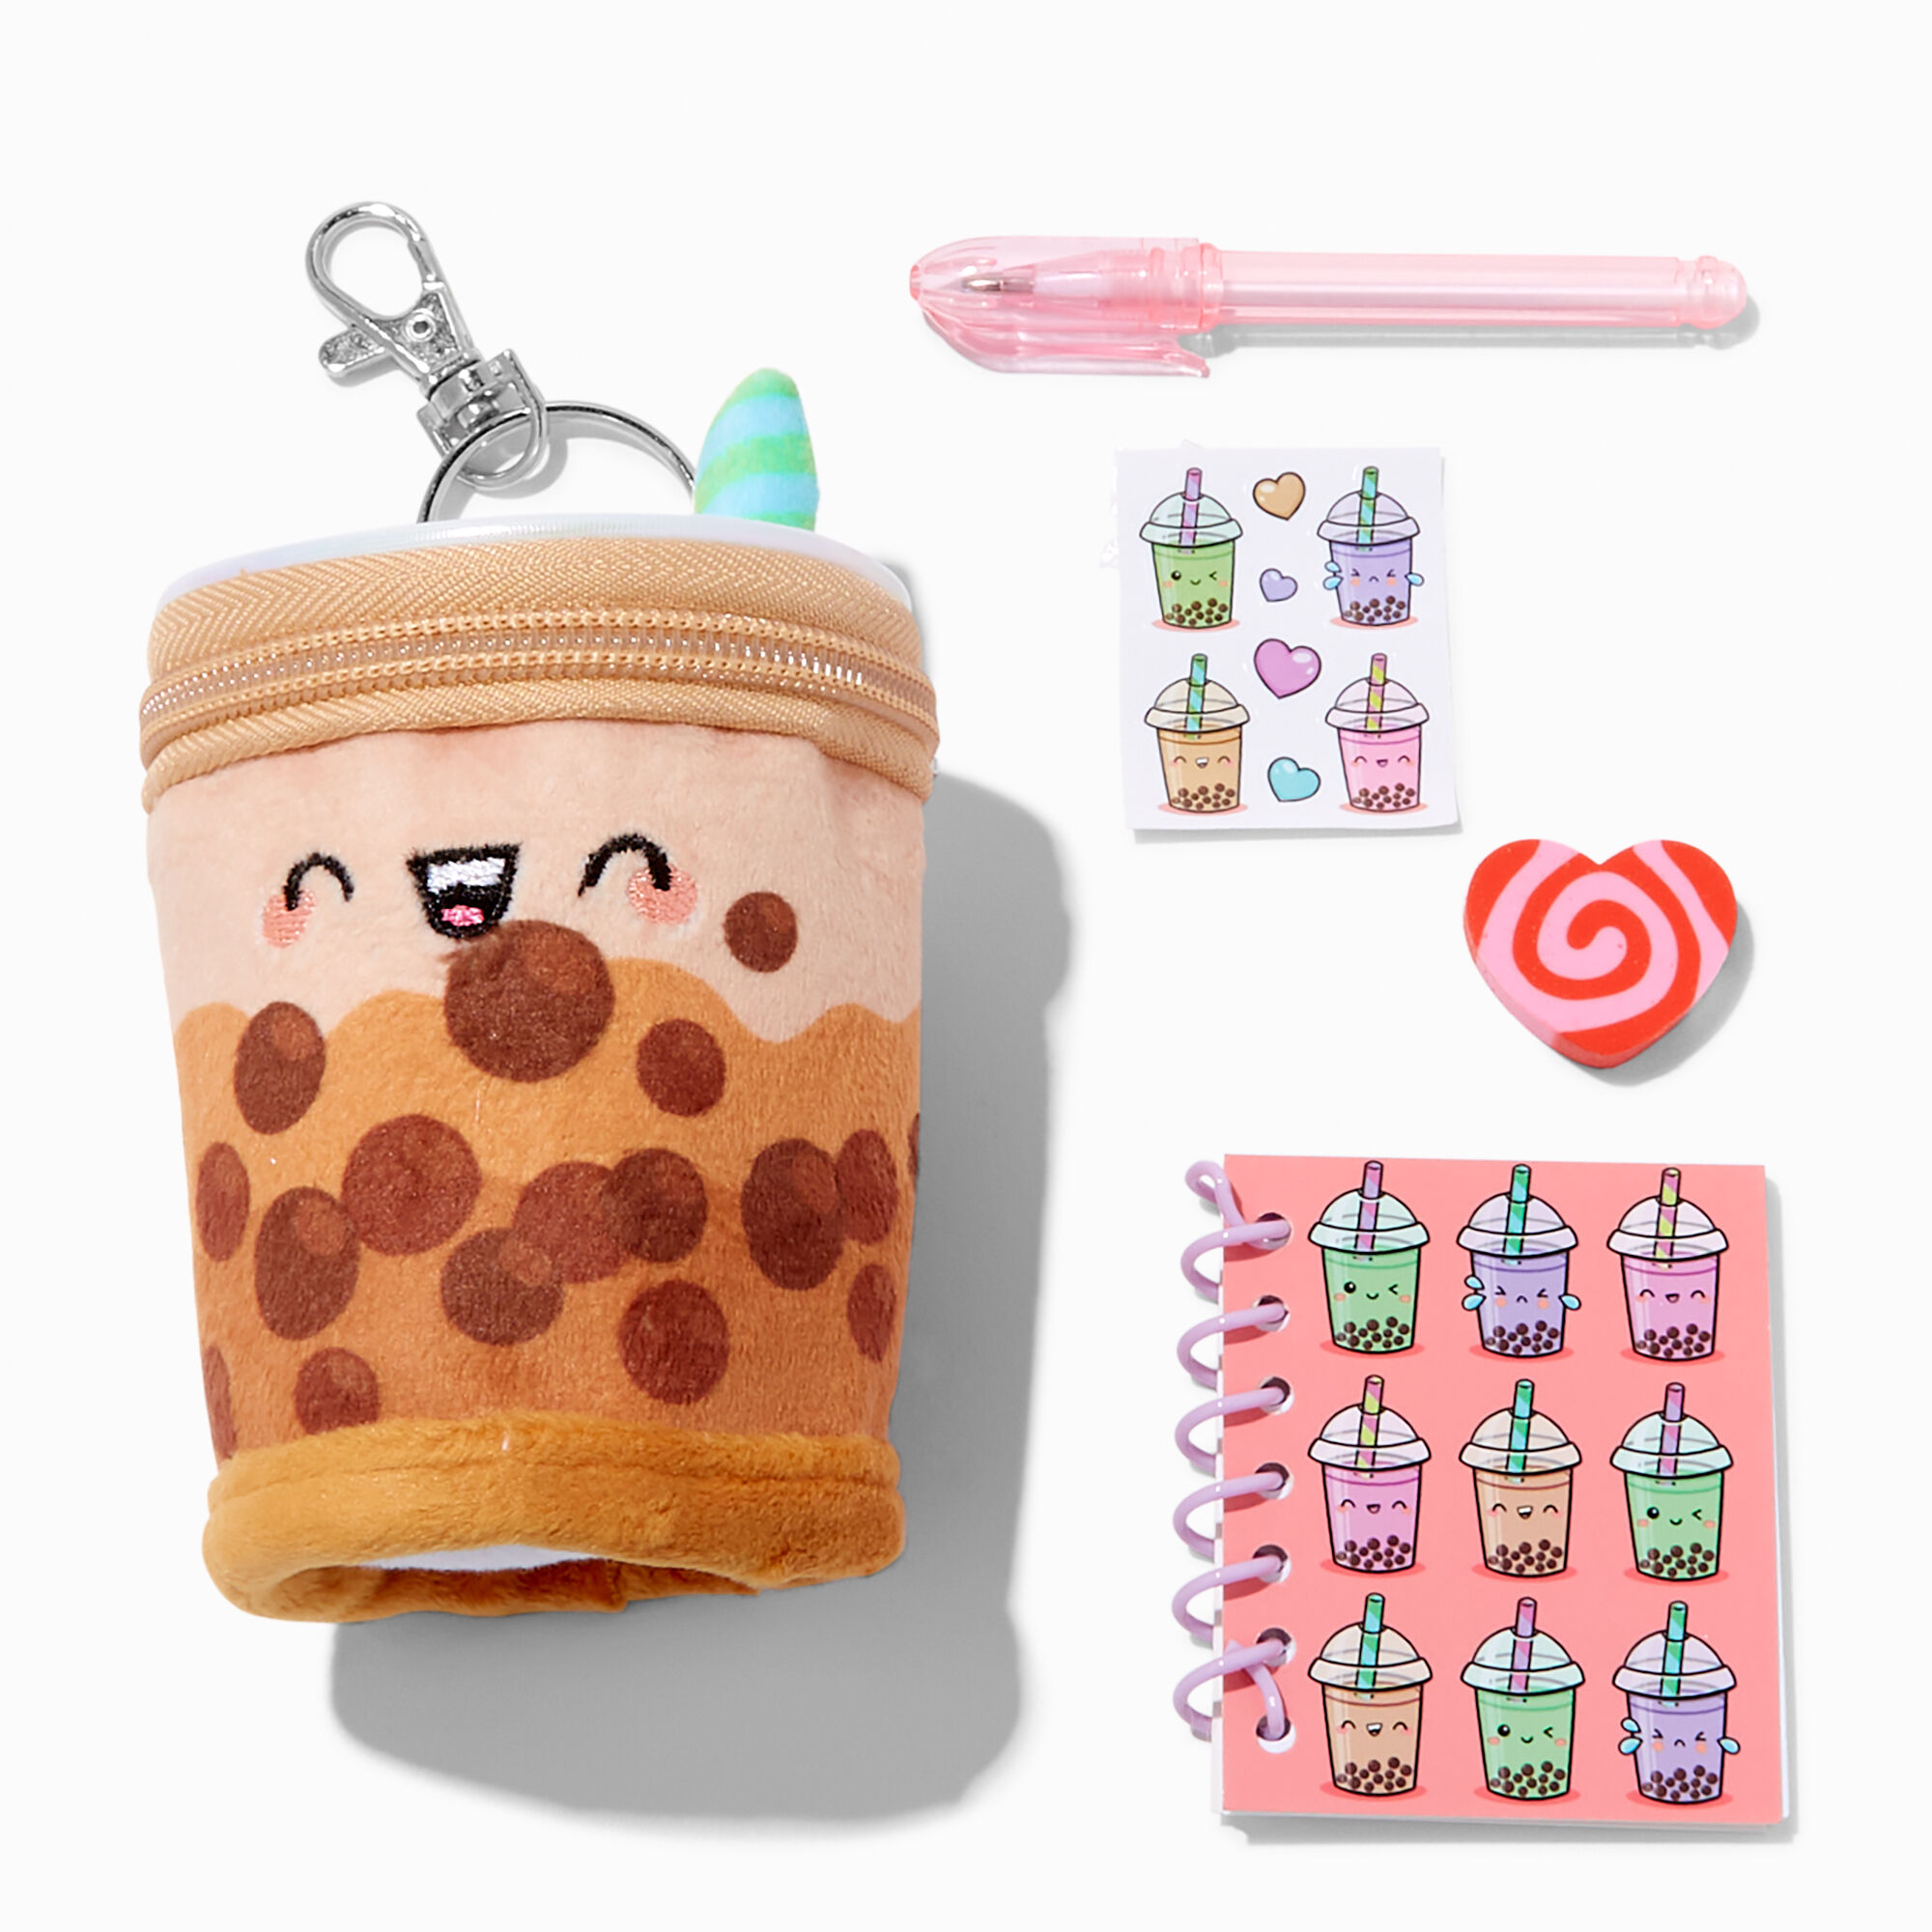 View Claires Boba Tea 4 Stationery Set information